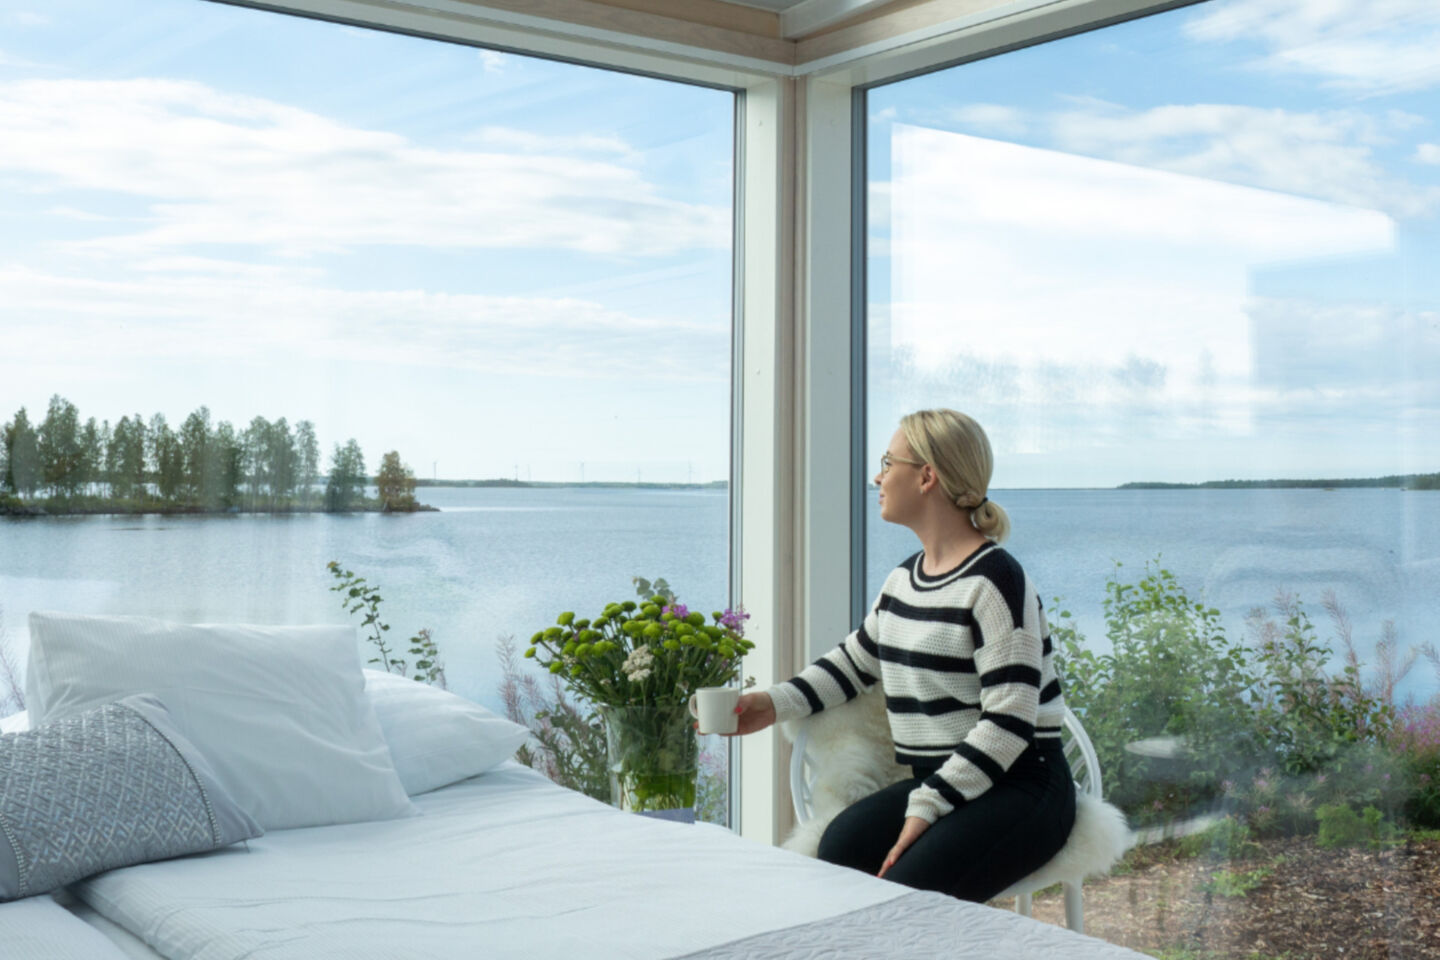 Enjoying the view at Seaside Glass Villas in Kemi, a Finnish Lapland holiday destination